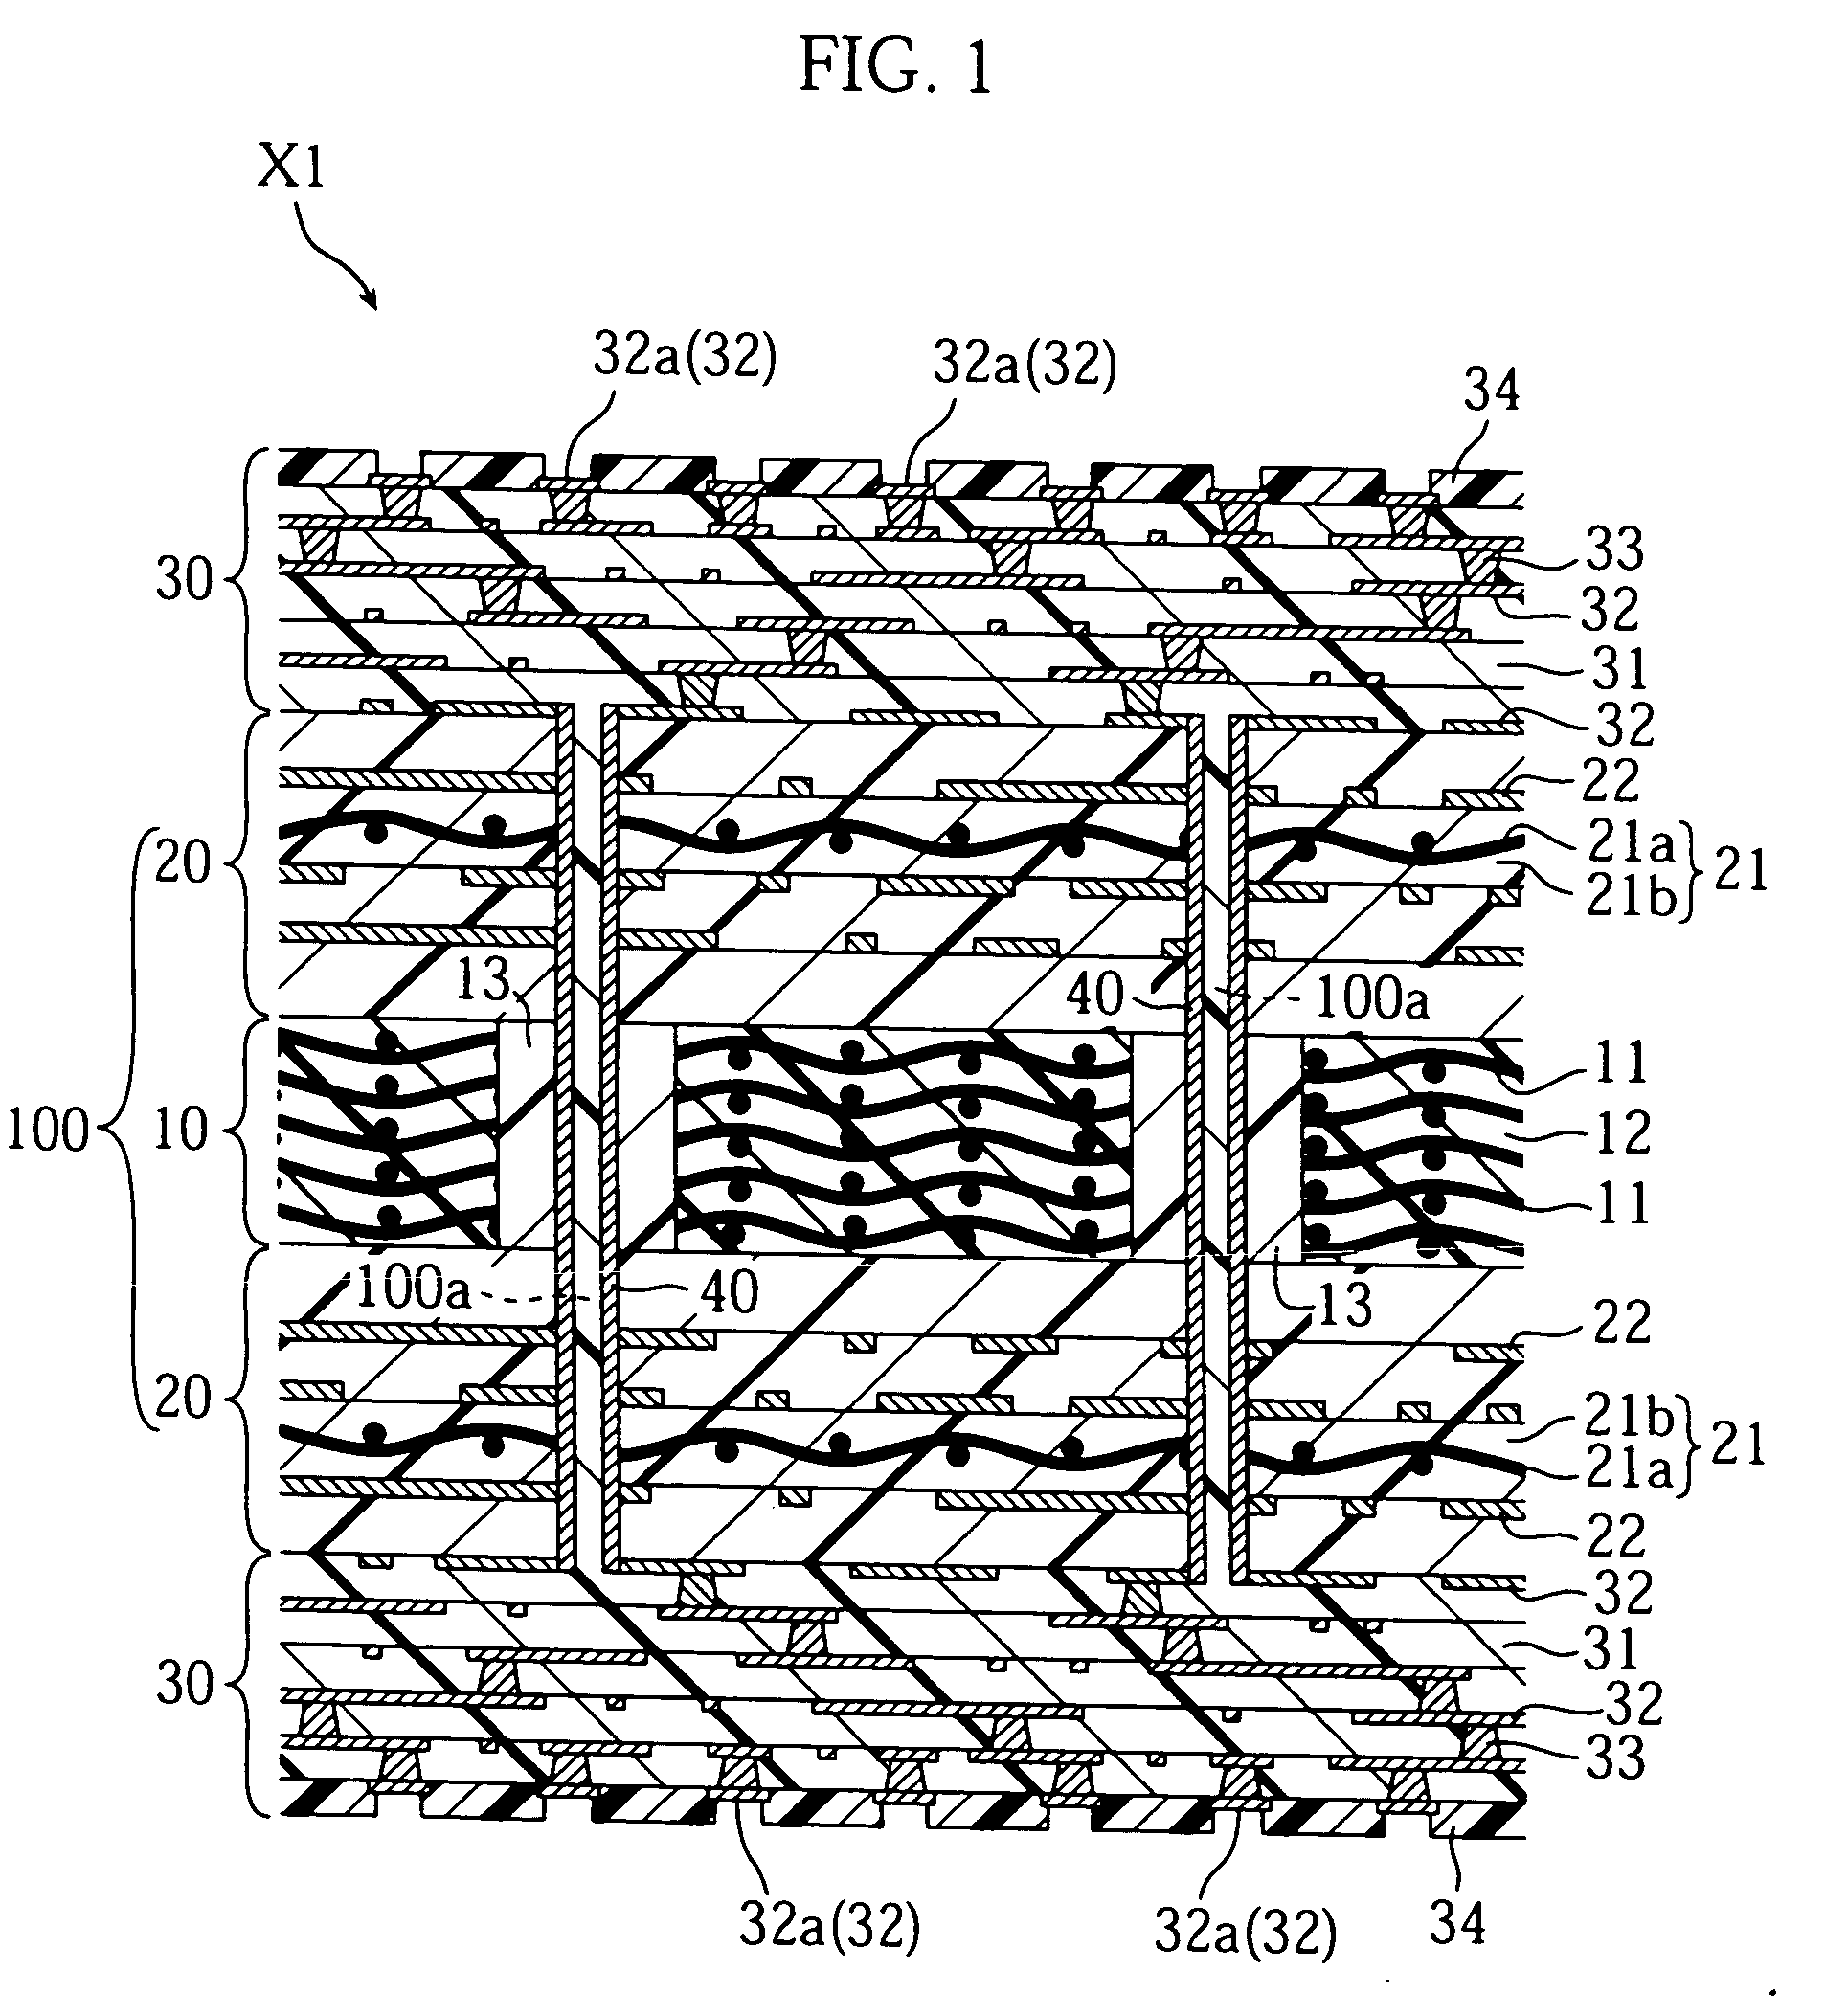 Multilayer wiring board, method for producing the same, and method for producing fiber reinforced resin board